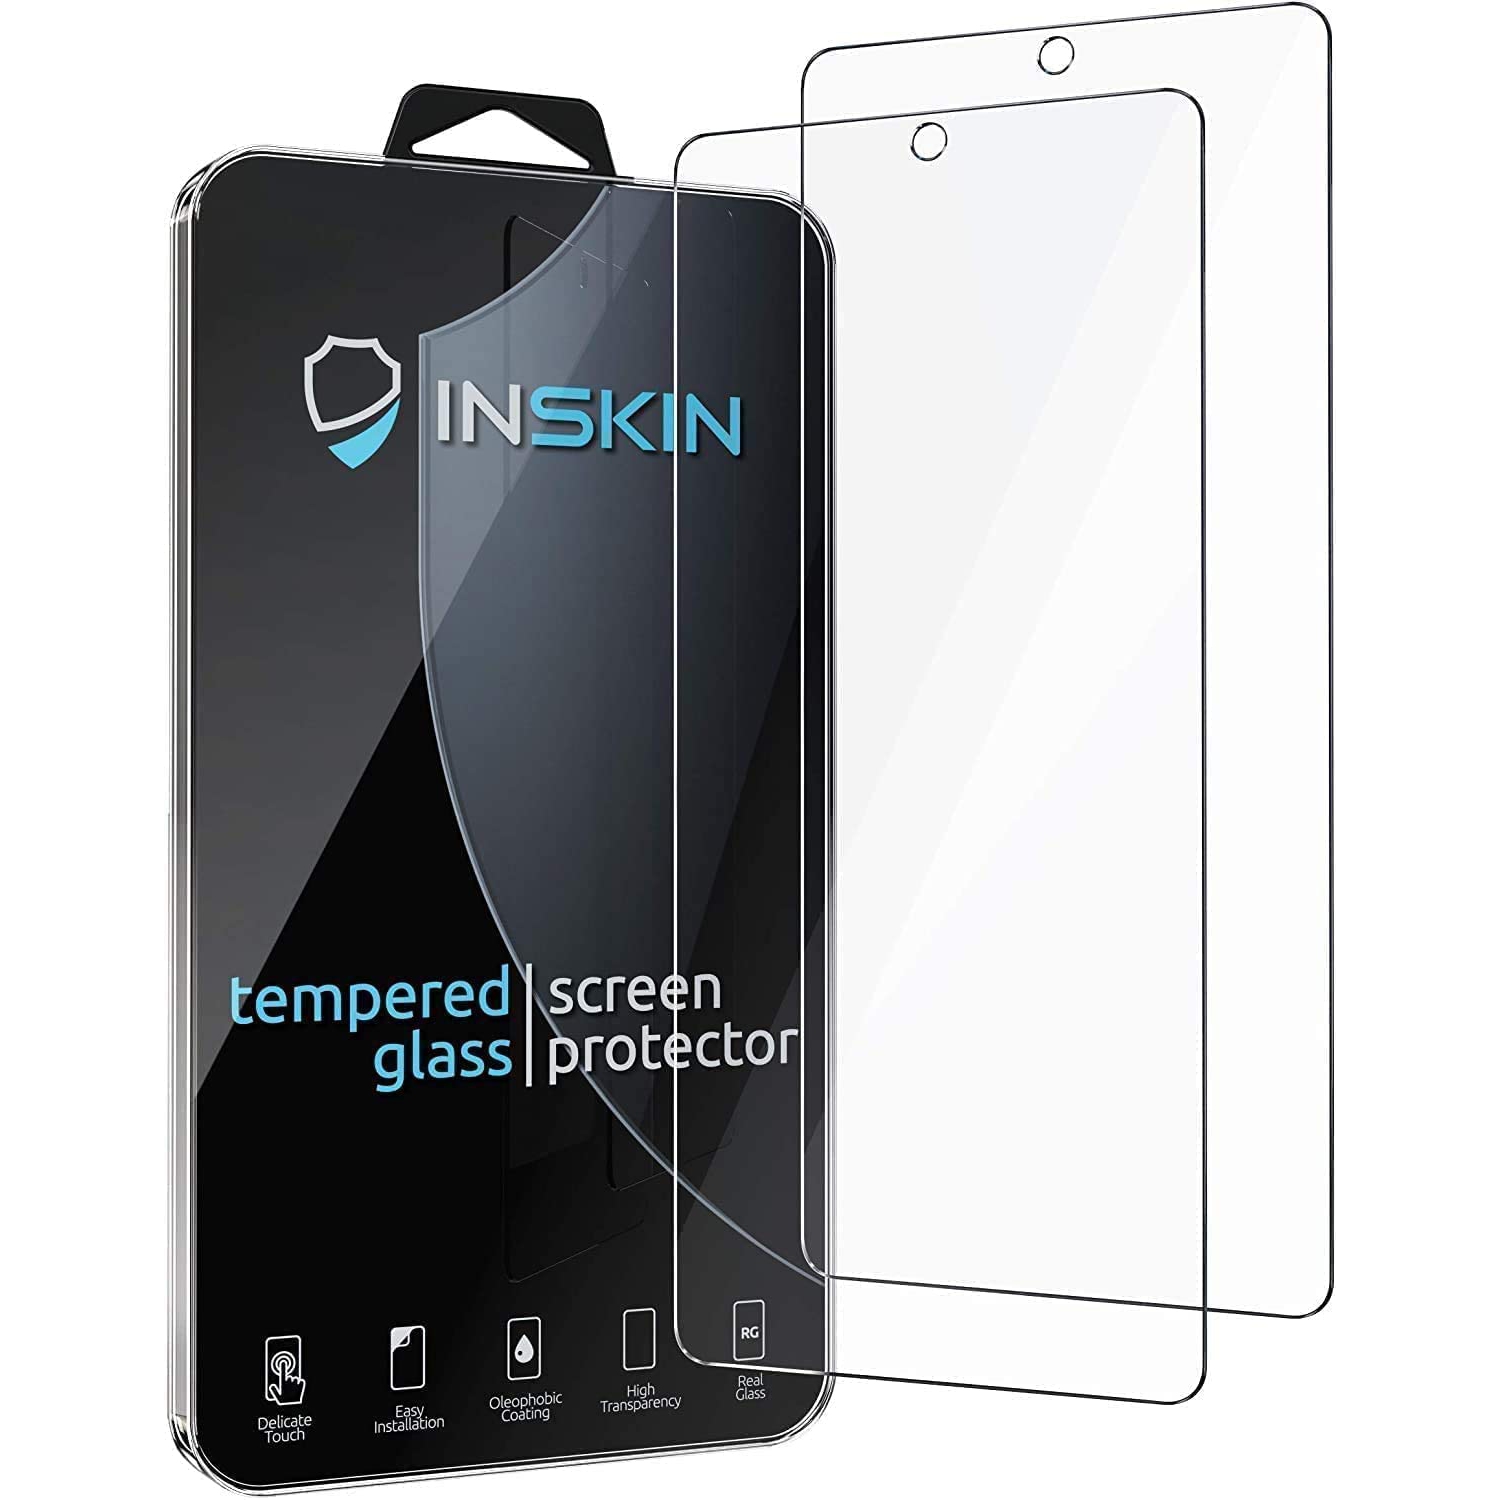 Inskin Case-Friendly Tempered Glass Screen Protector, fits Samsung Galaxy S22 Plus 5G 6.6 inch. 2-Pack.